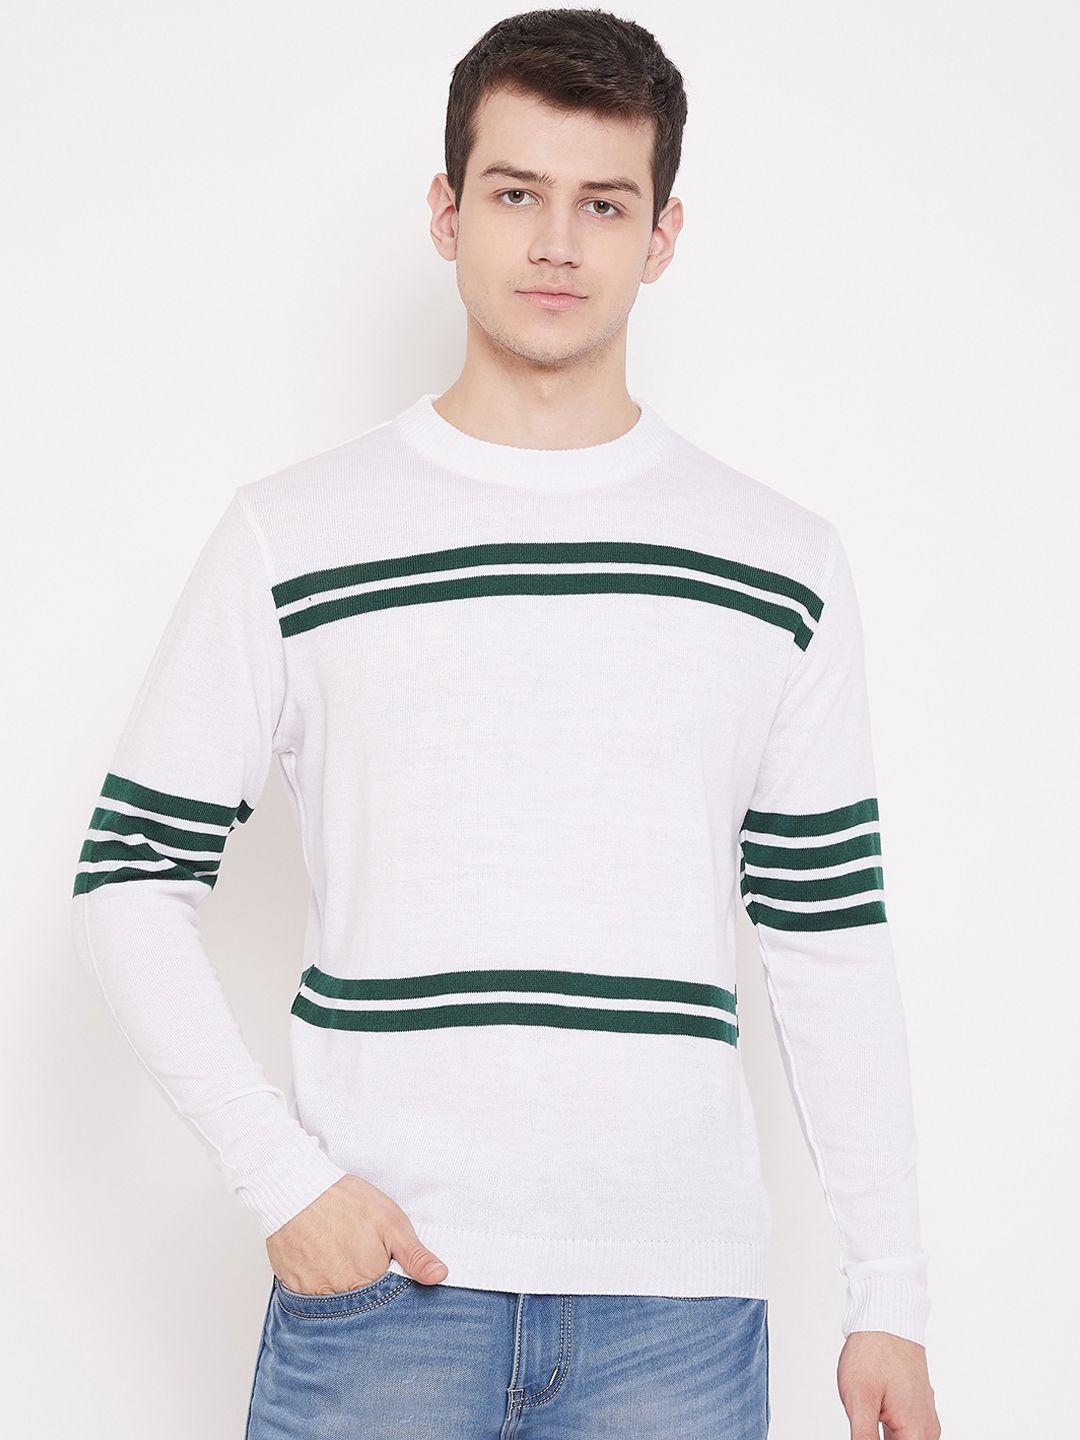 jump usa men acrylic white & green striped pullover sweater